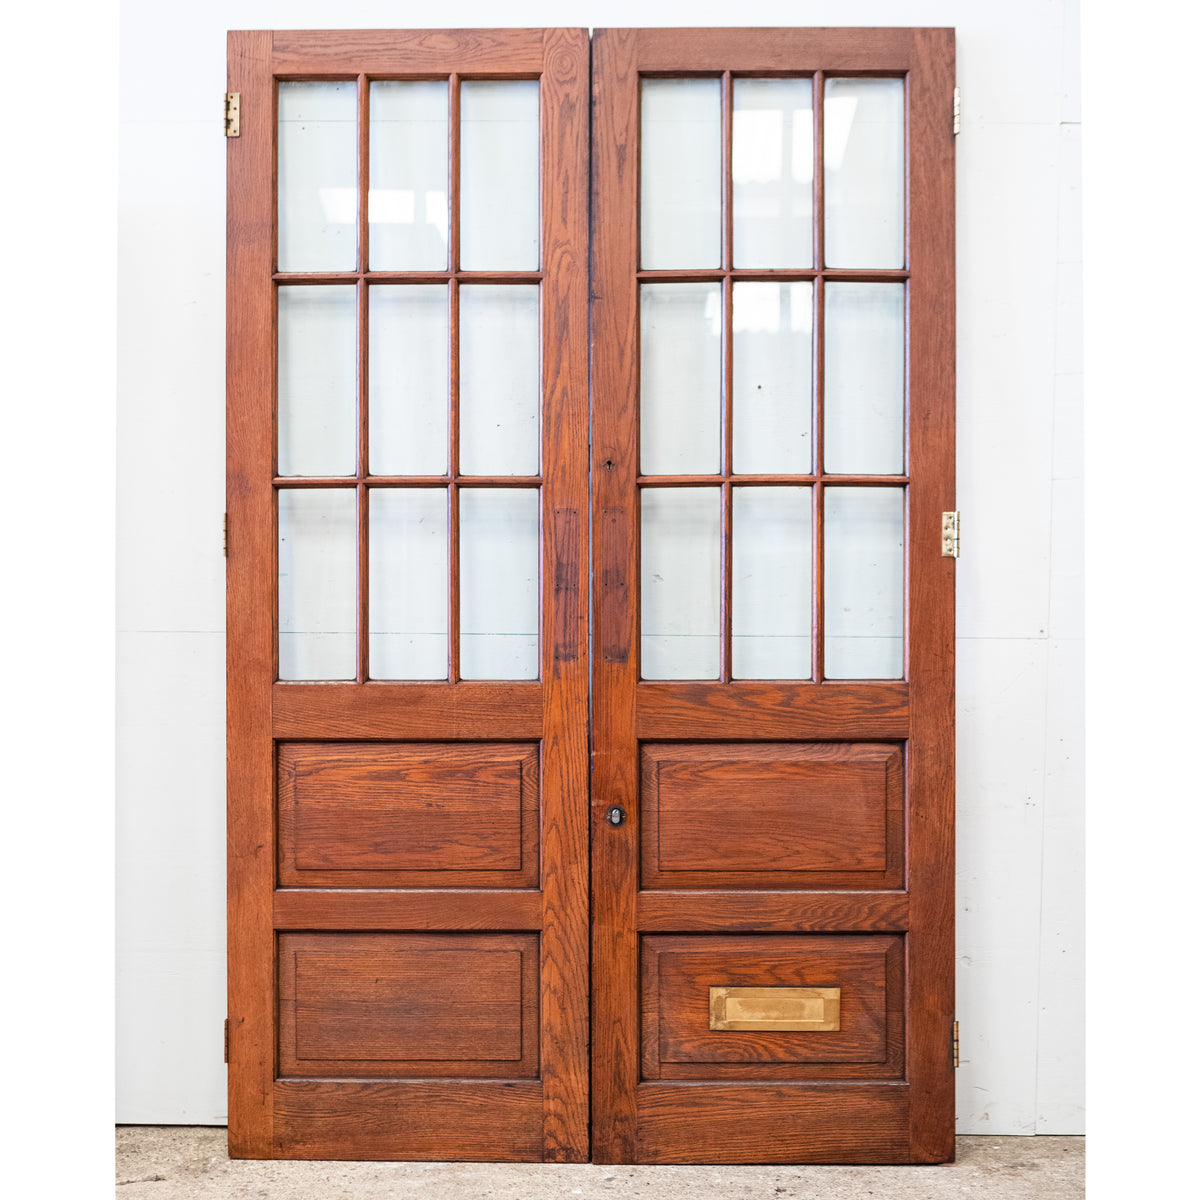 Large Antique Double Doors | Solid Oak Doors with Glazed Panels | The Architectural Forum